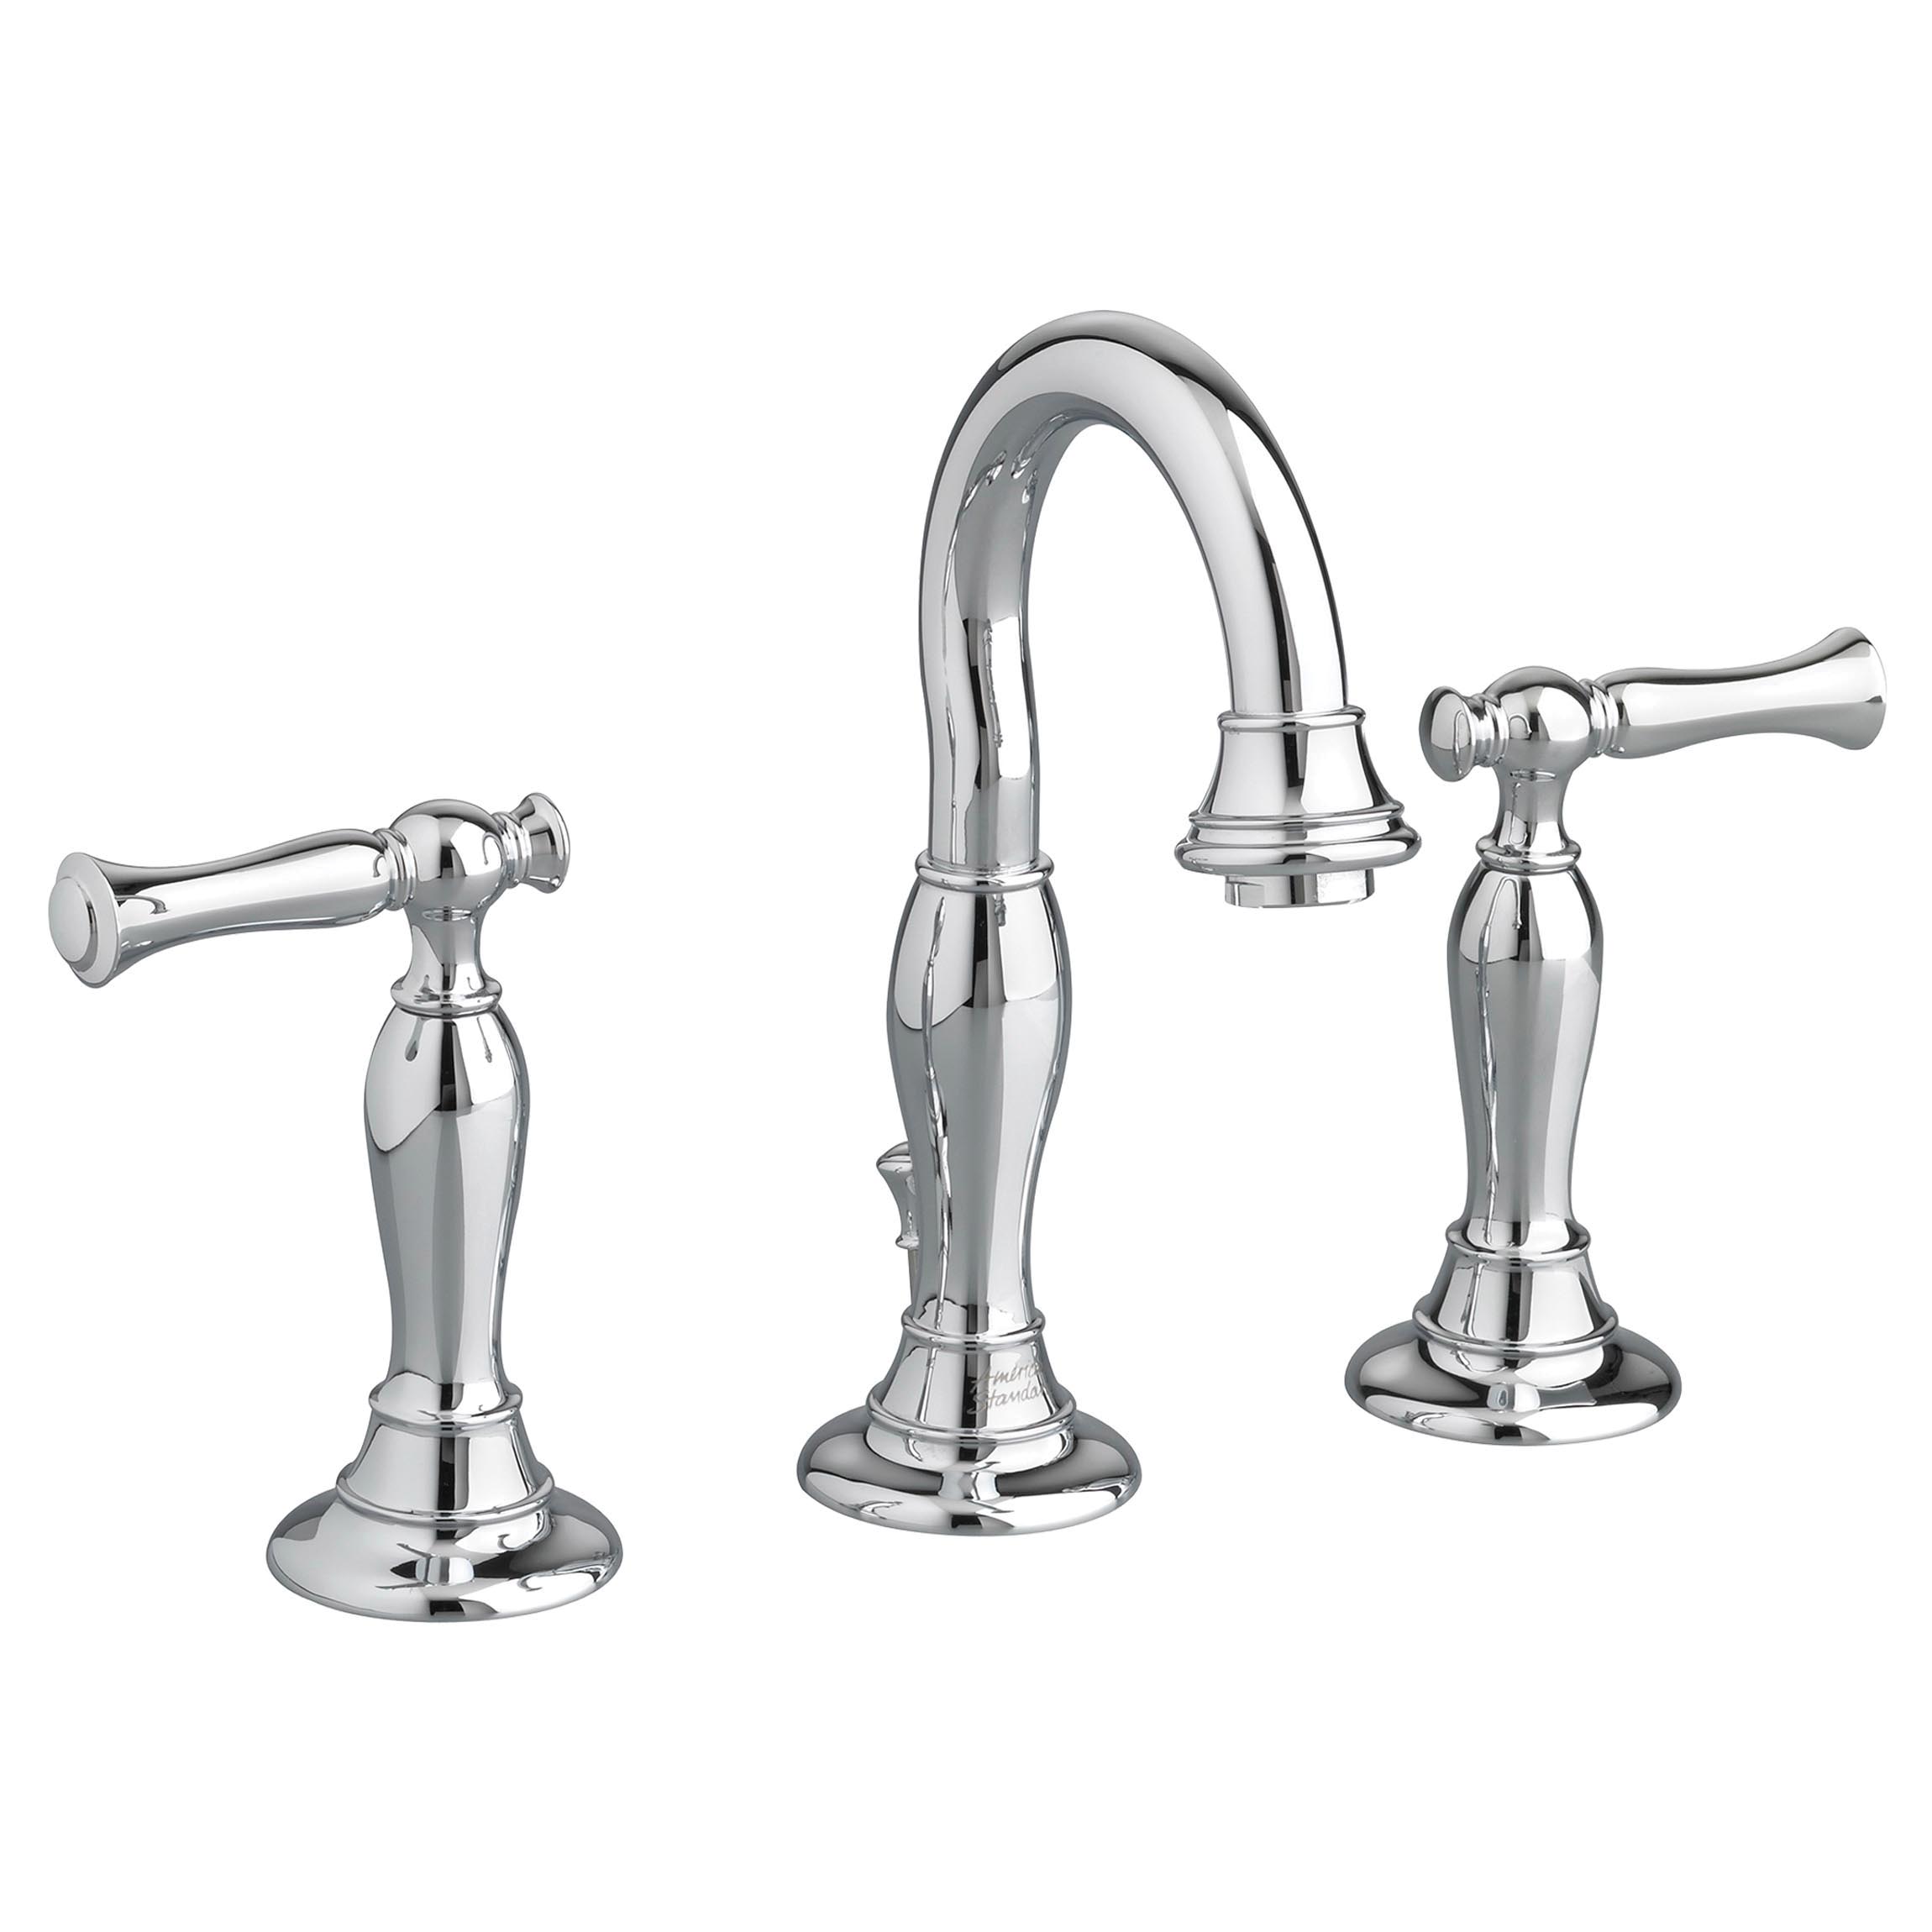 American Standard 7440.801.002 Widespread Lavatory Faucet, Quentin™, 1.2 gpm Flow Rate, 5-3/8 in H Spout, Polished Chrome, 2 Handles, Speed Connect® Pop-Up Drain, Import